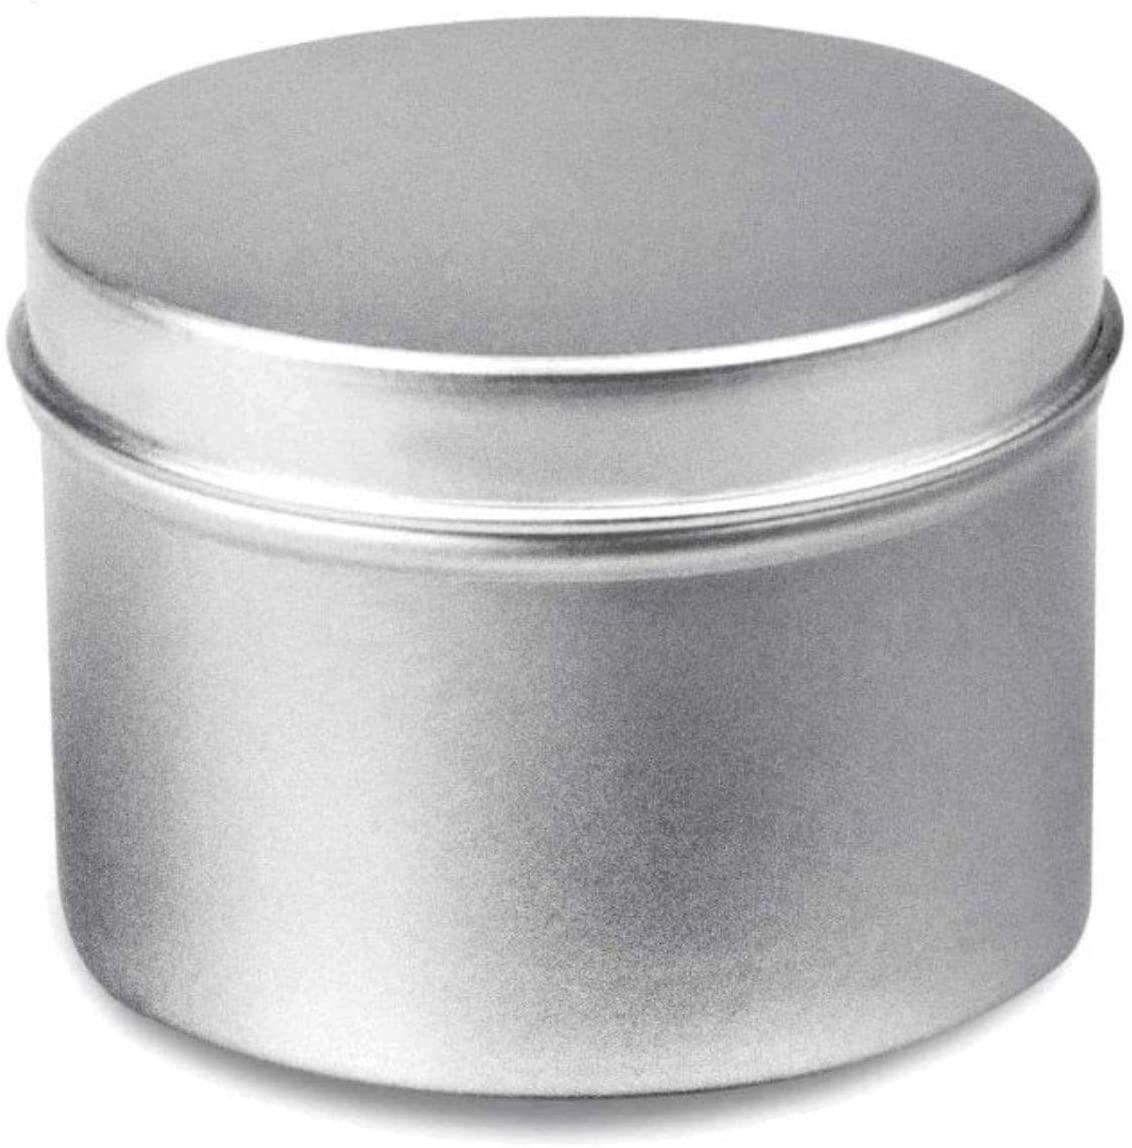 Tin Cans, 12 Pack – Large (8 oz) – 3” x 2.6” – For Creams, Crafts, Storing Spices and Candy